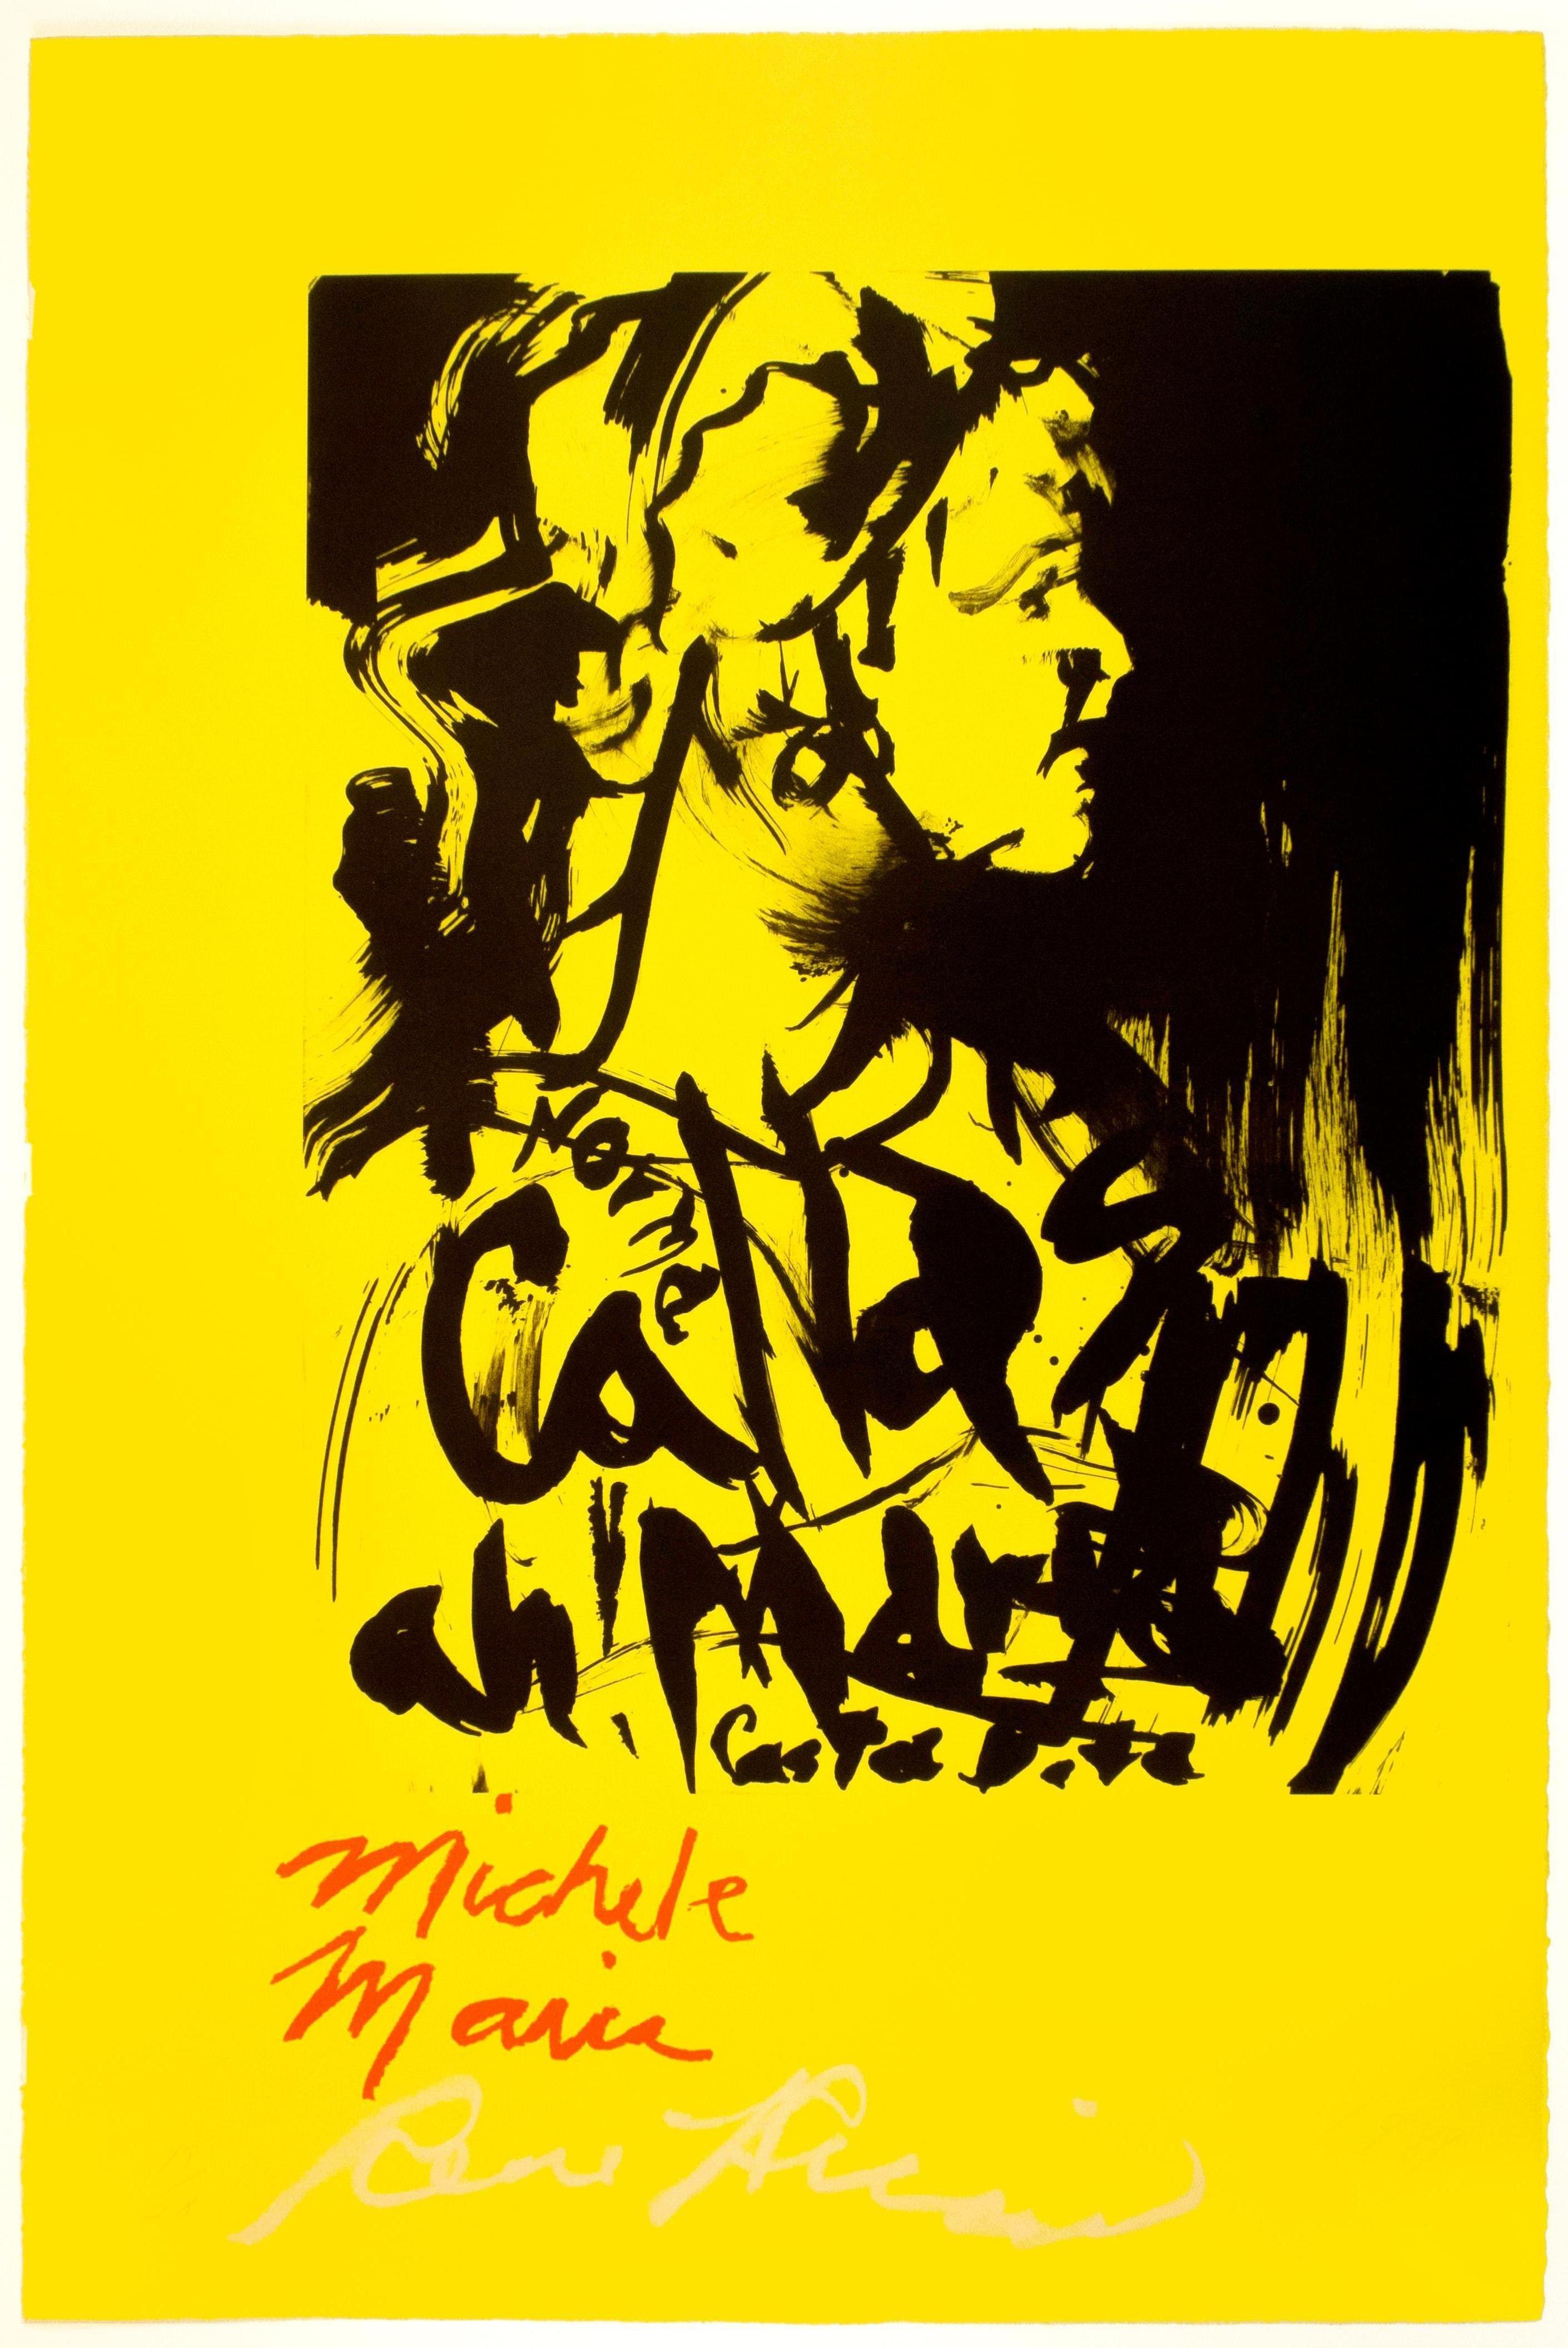 Rene Ricard Abstract Print - Michele Maria: bright yellow red Maria Callas opera artist portrait with poetry 